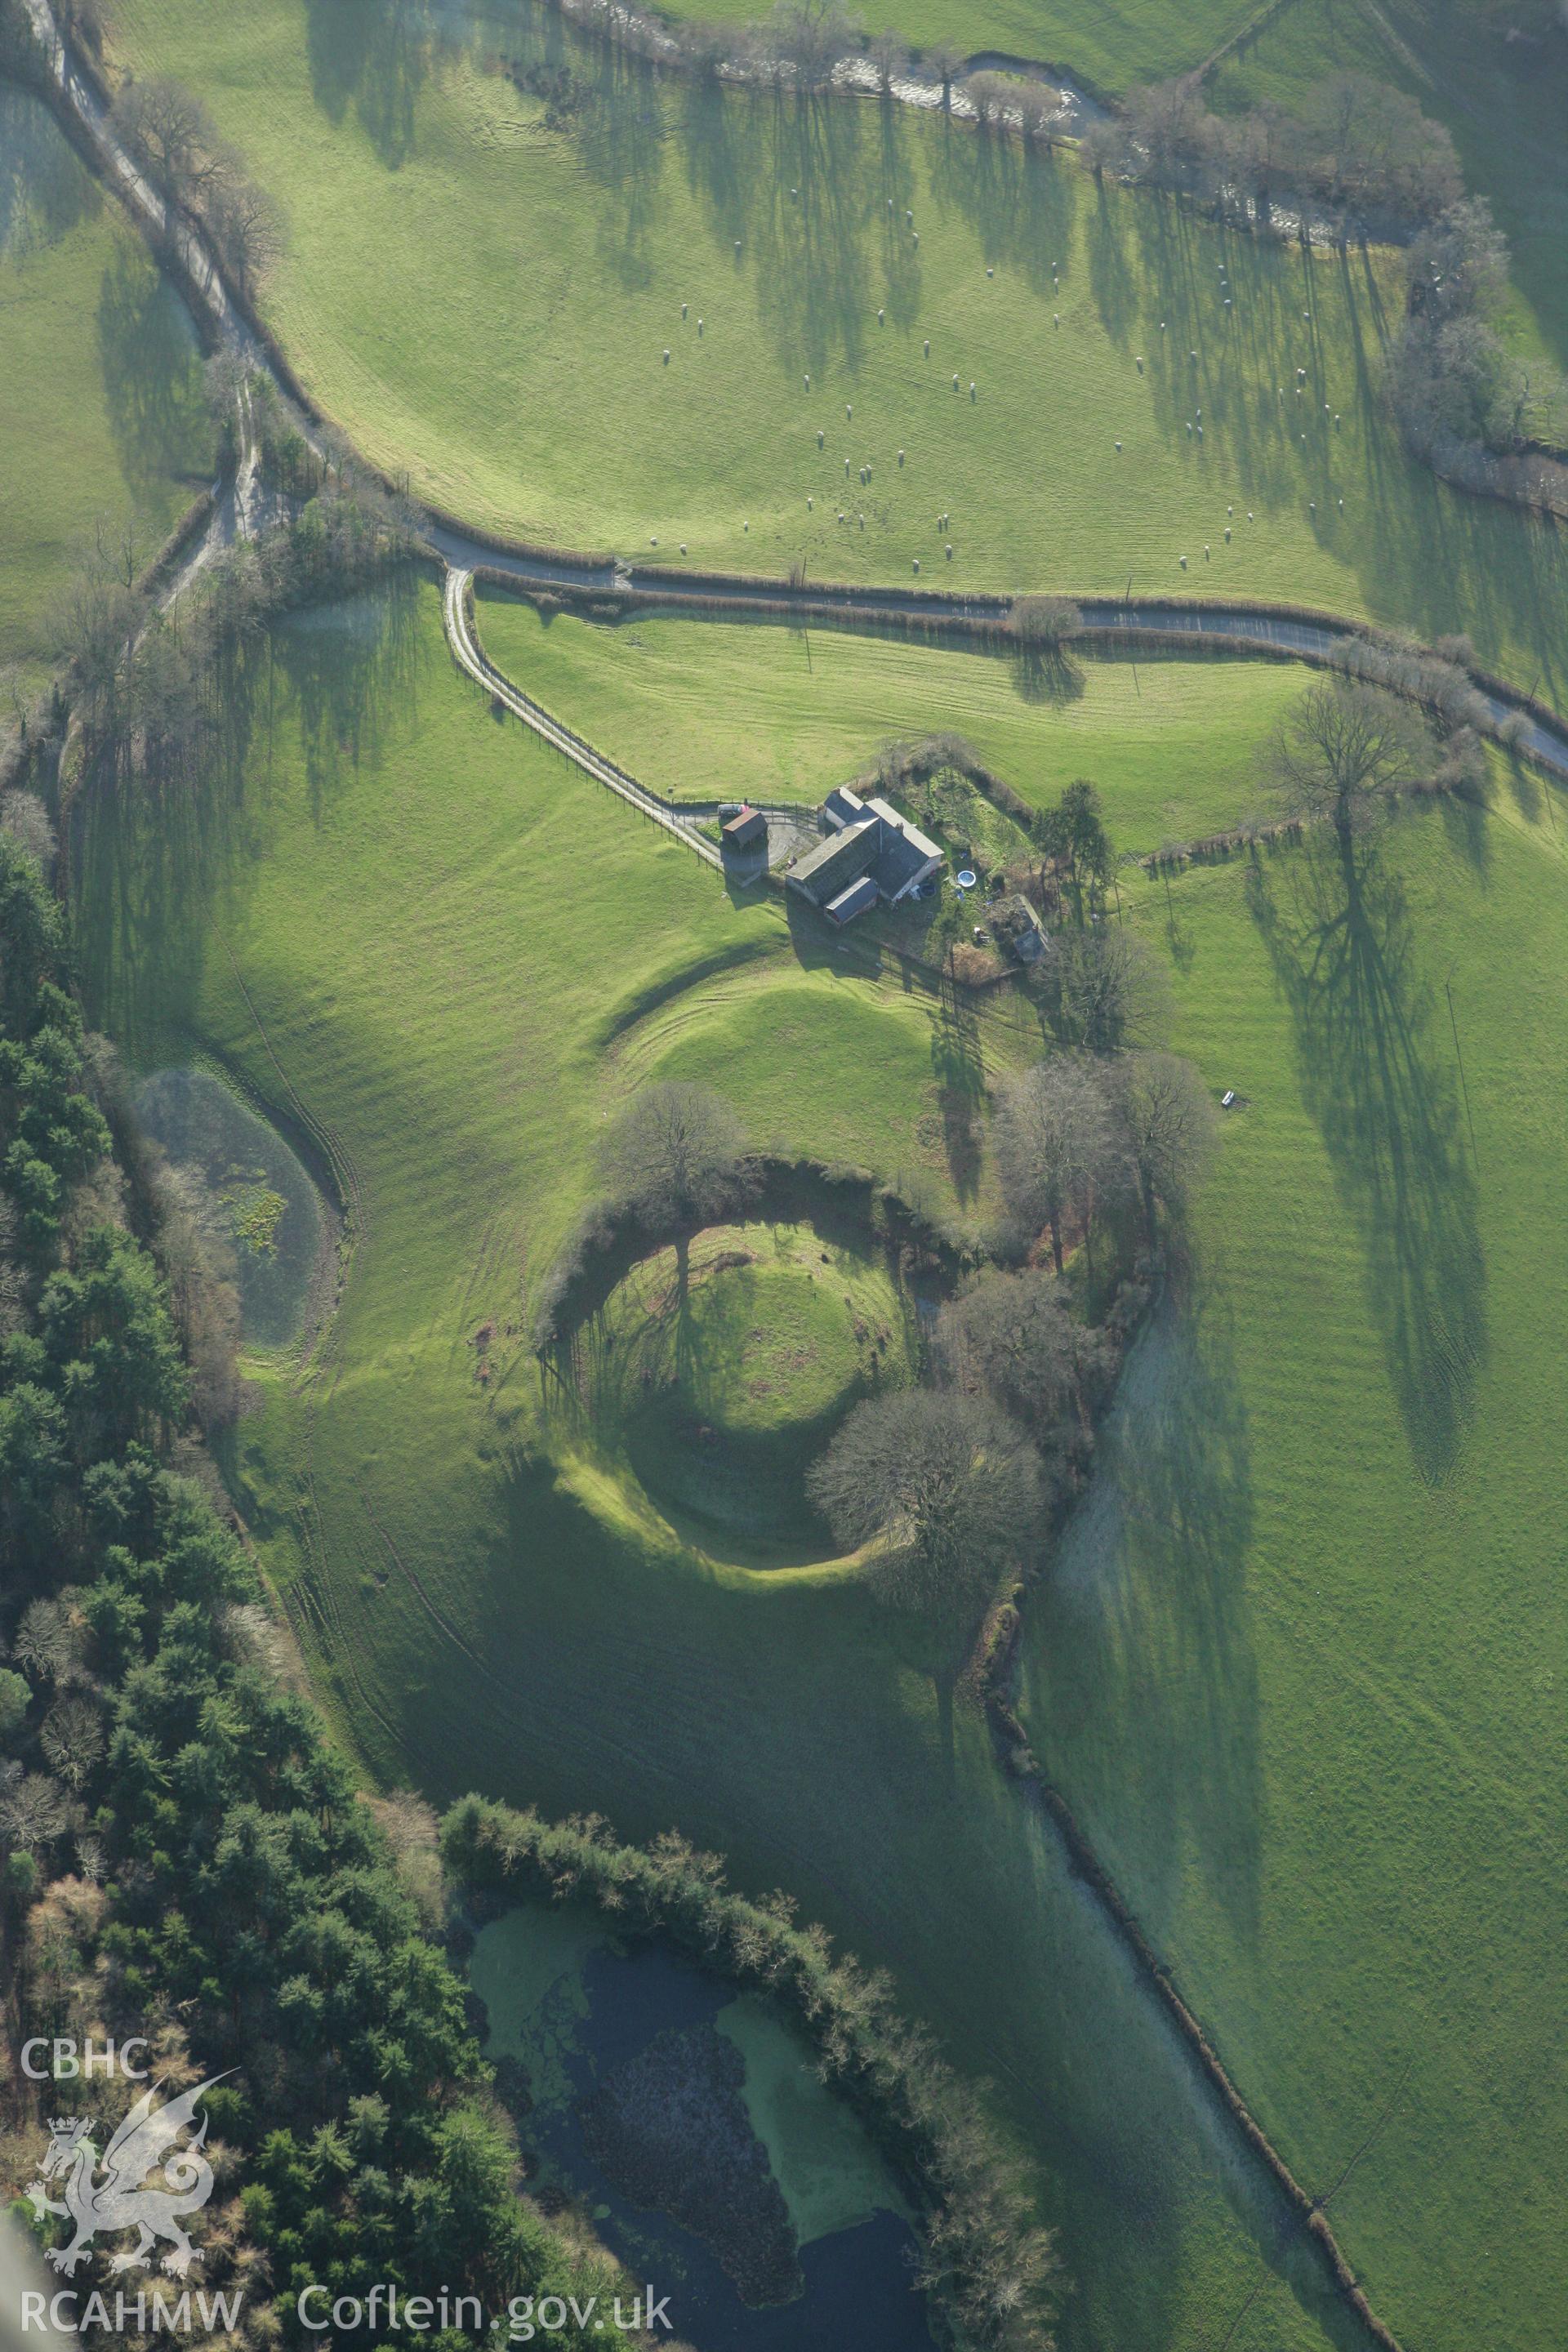 RCAHMW colour oblique photograph of Sycarth Castle, motte and bailey. Taken by Toby Driver on 11/12/2007.